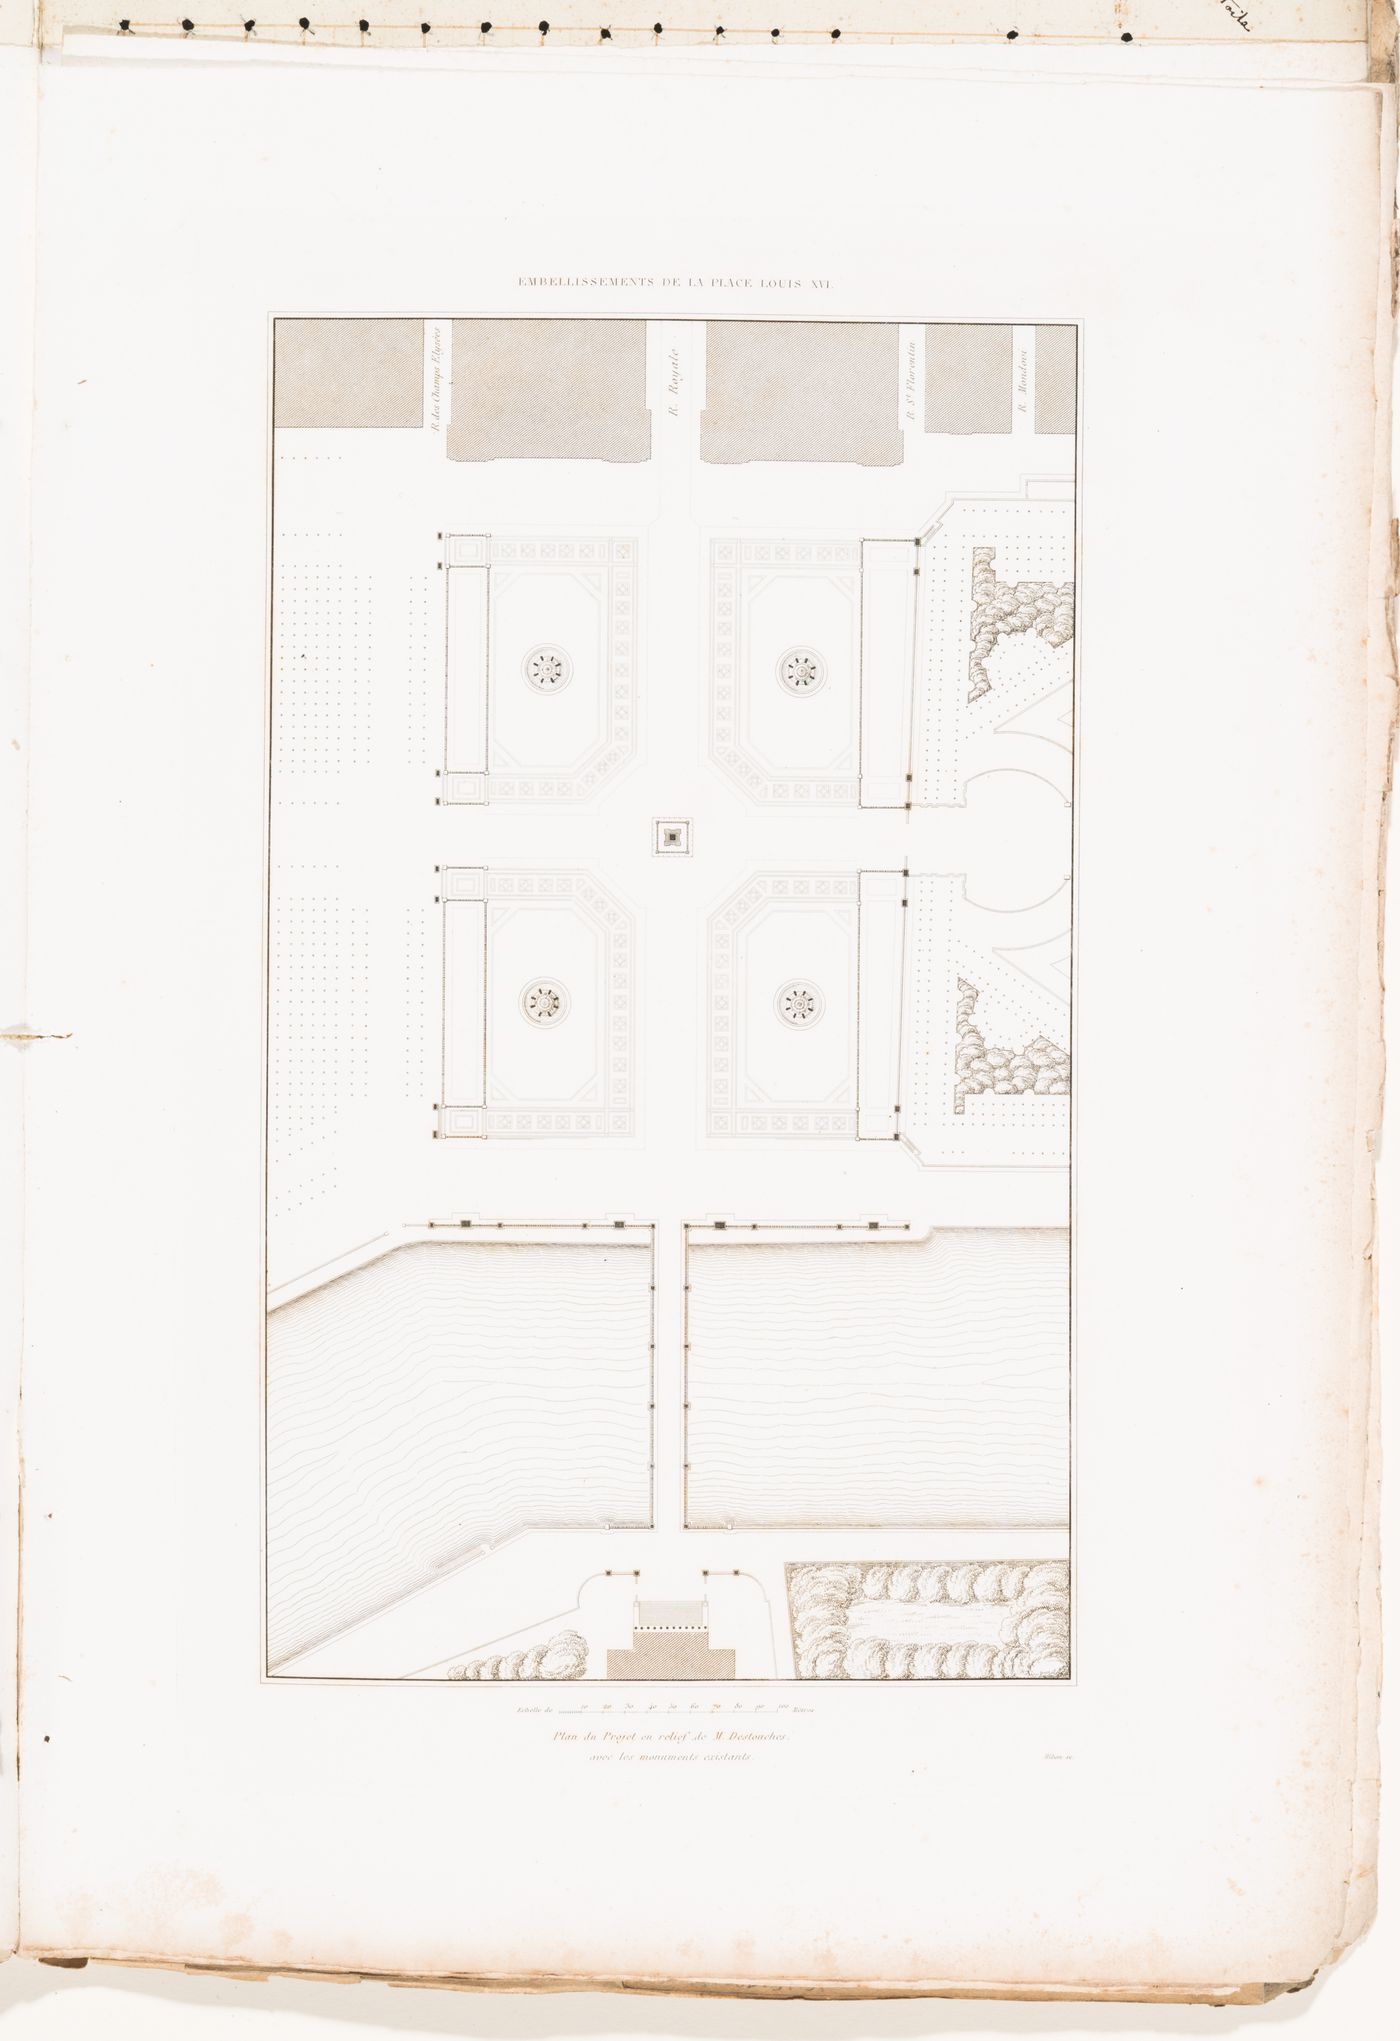 Plan for a project "en relief" by Destouches for place Louis XVI